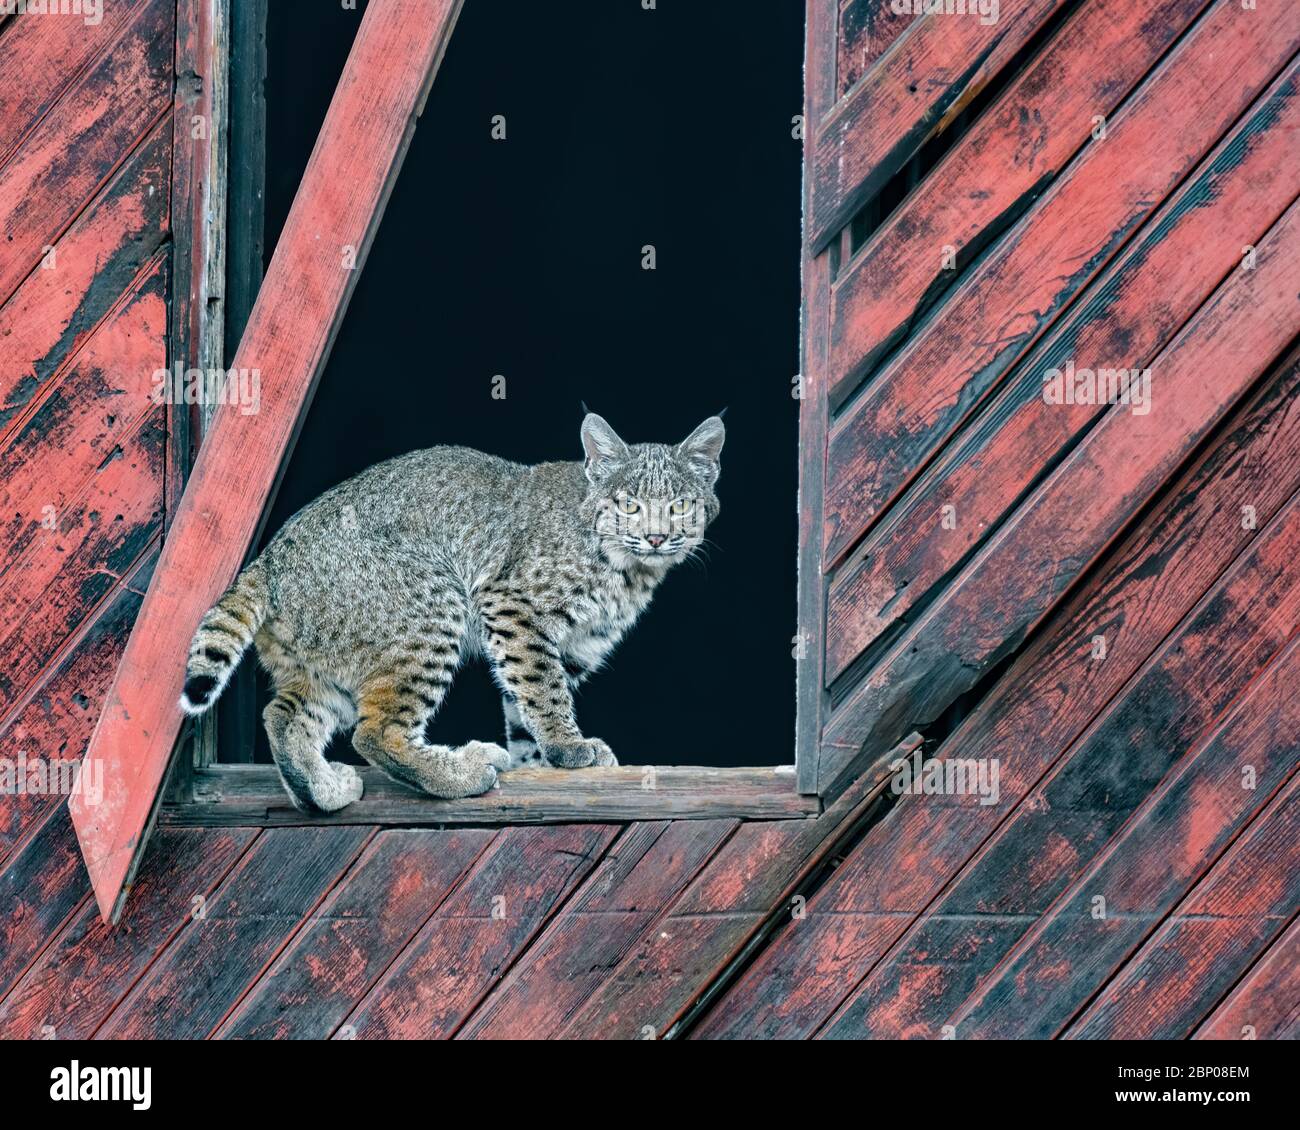 Framed - A young female Bobcat is framed by an old barn window and captured in my camera frame. The intersection of nature and civilization. Stock Photo